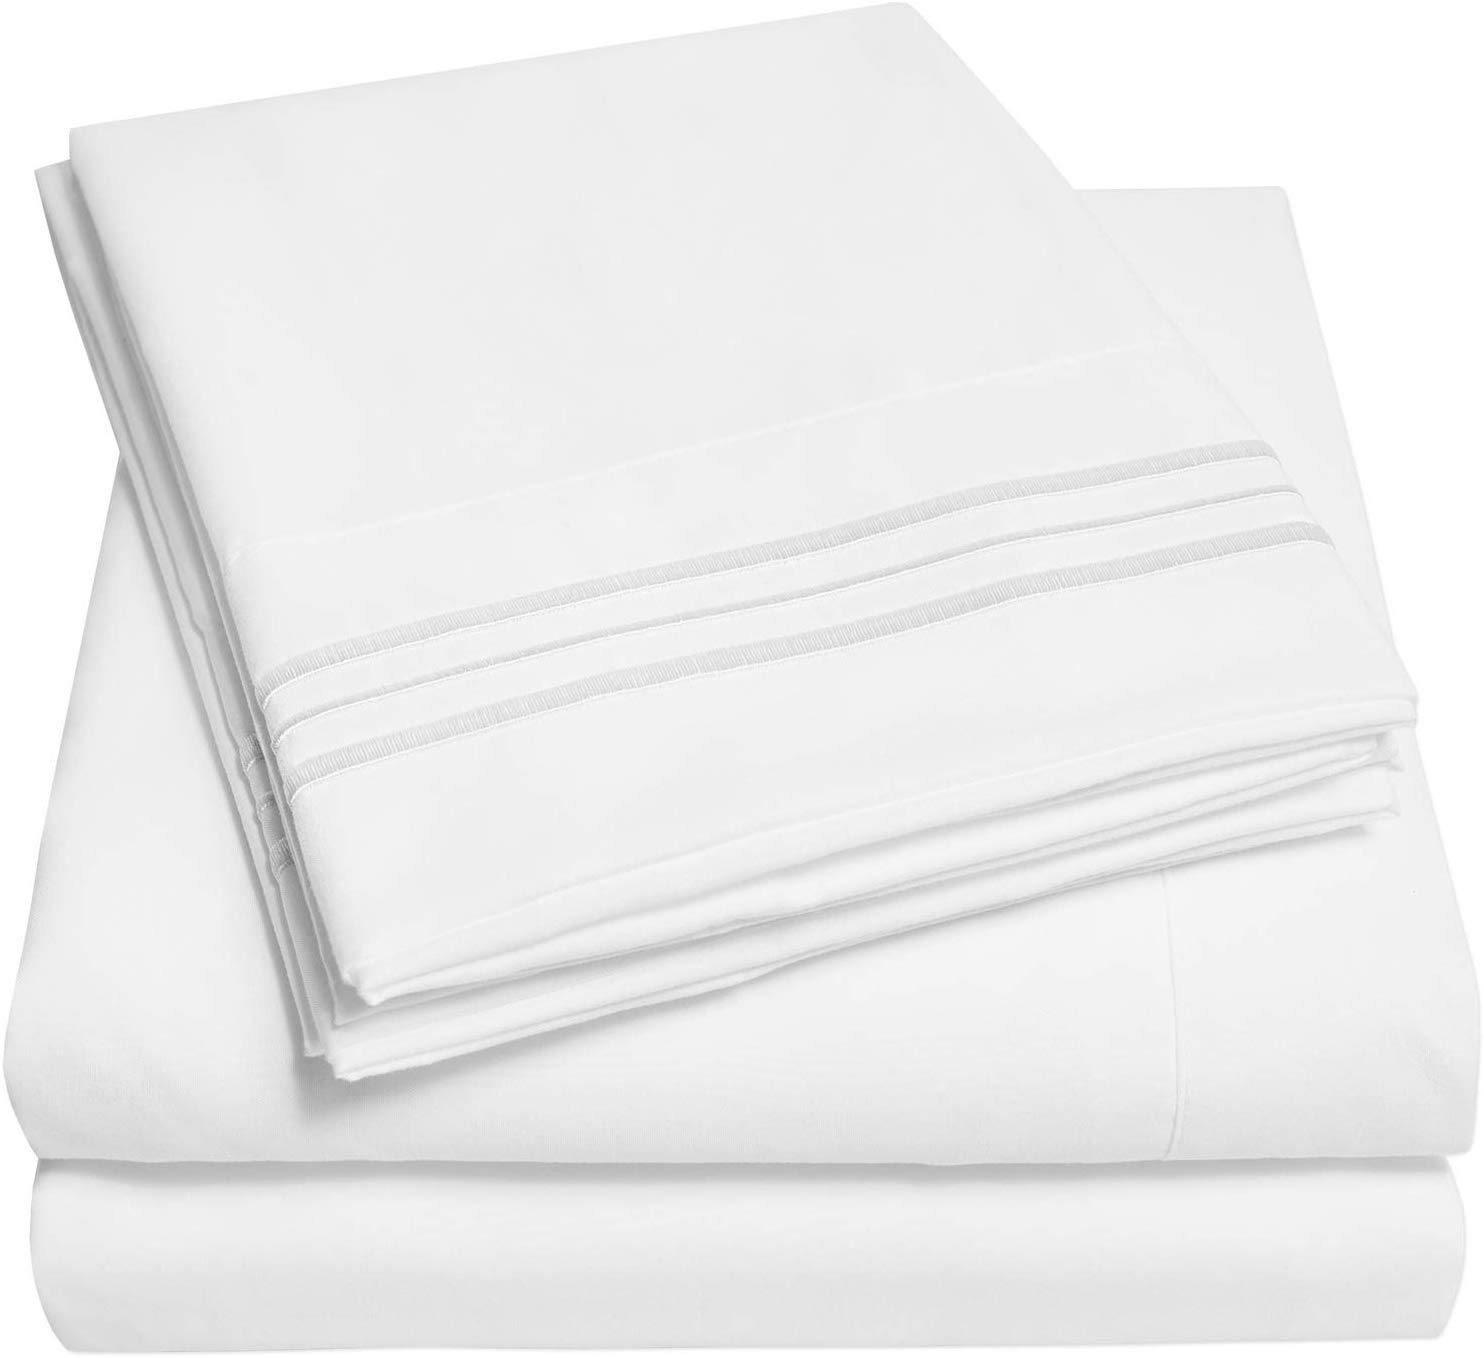 Sweet Home Collection Machine Washable Trademark Microfiber Sheets